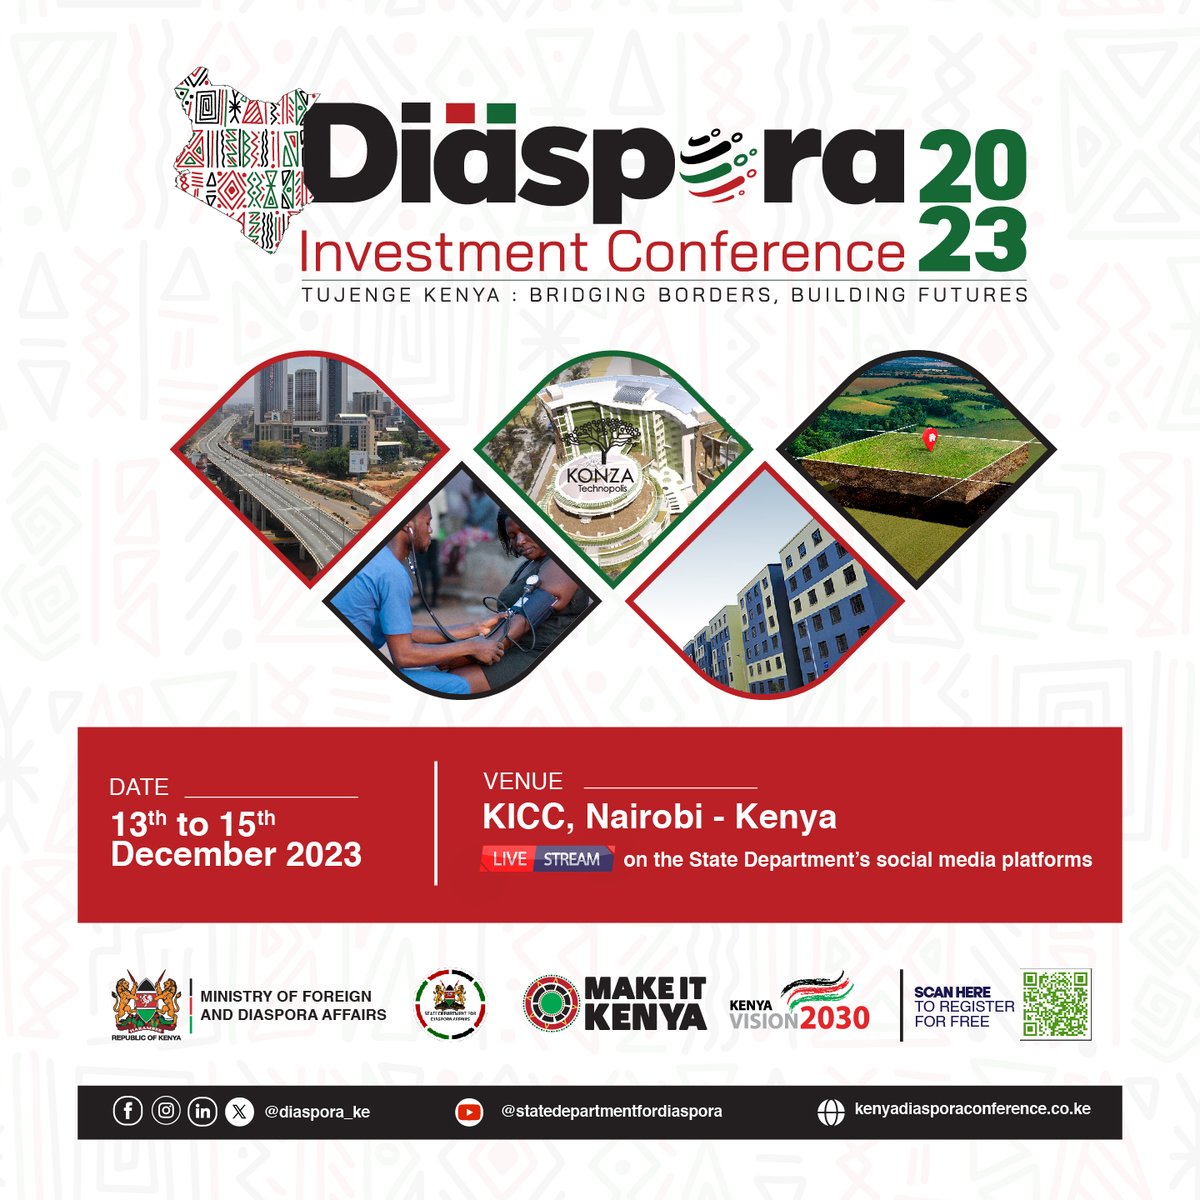 Diaspora Investment Conference 2023: Why You Need to Register